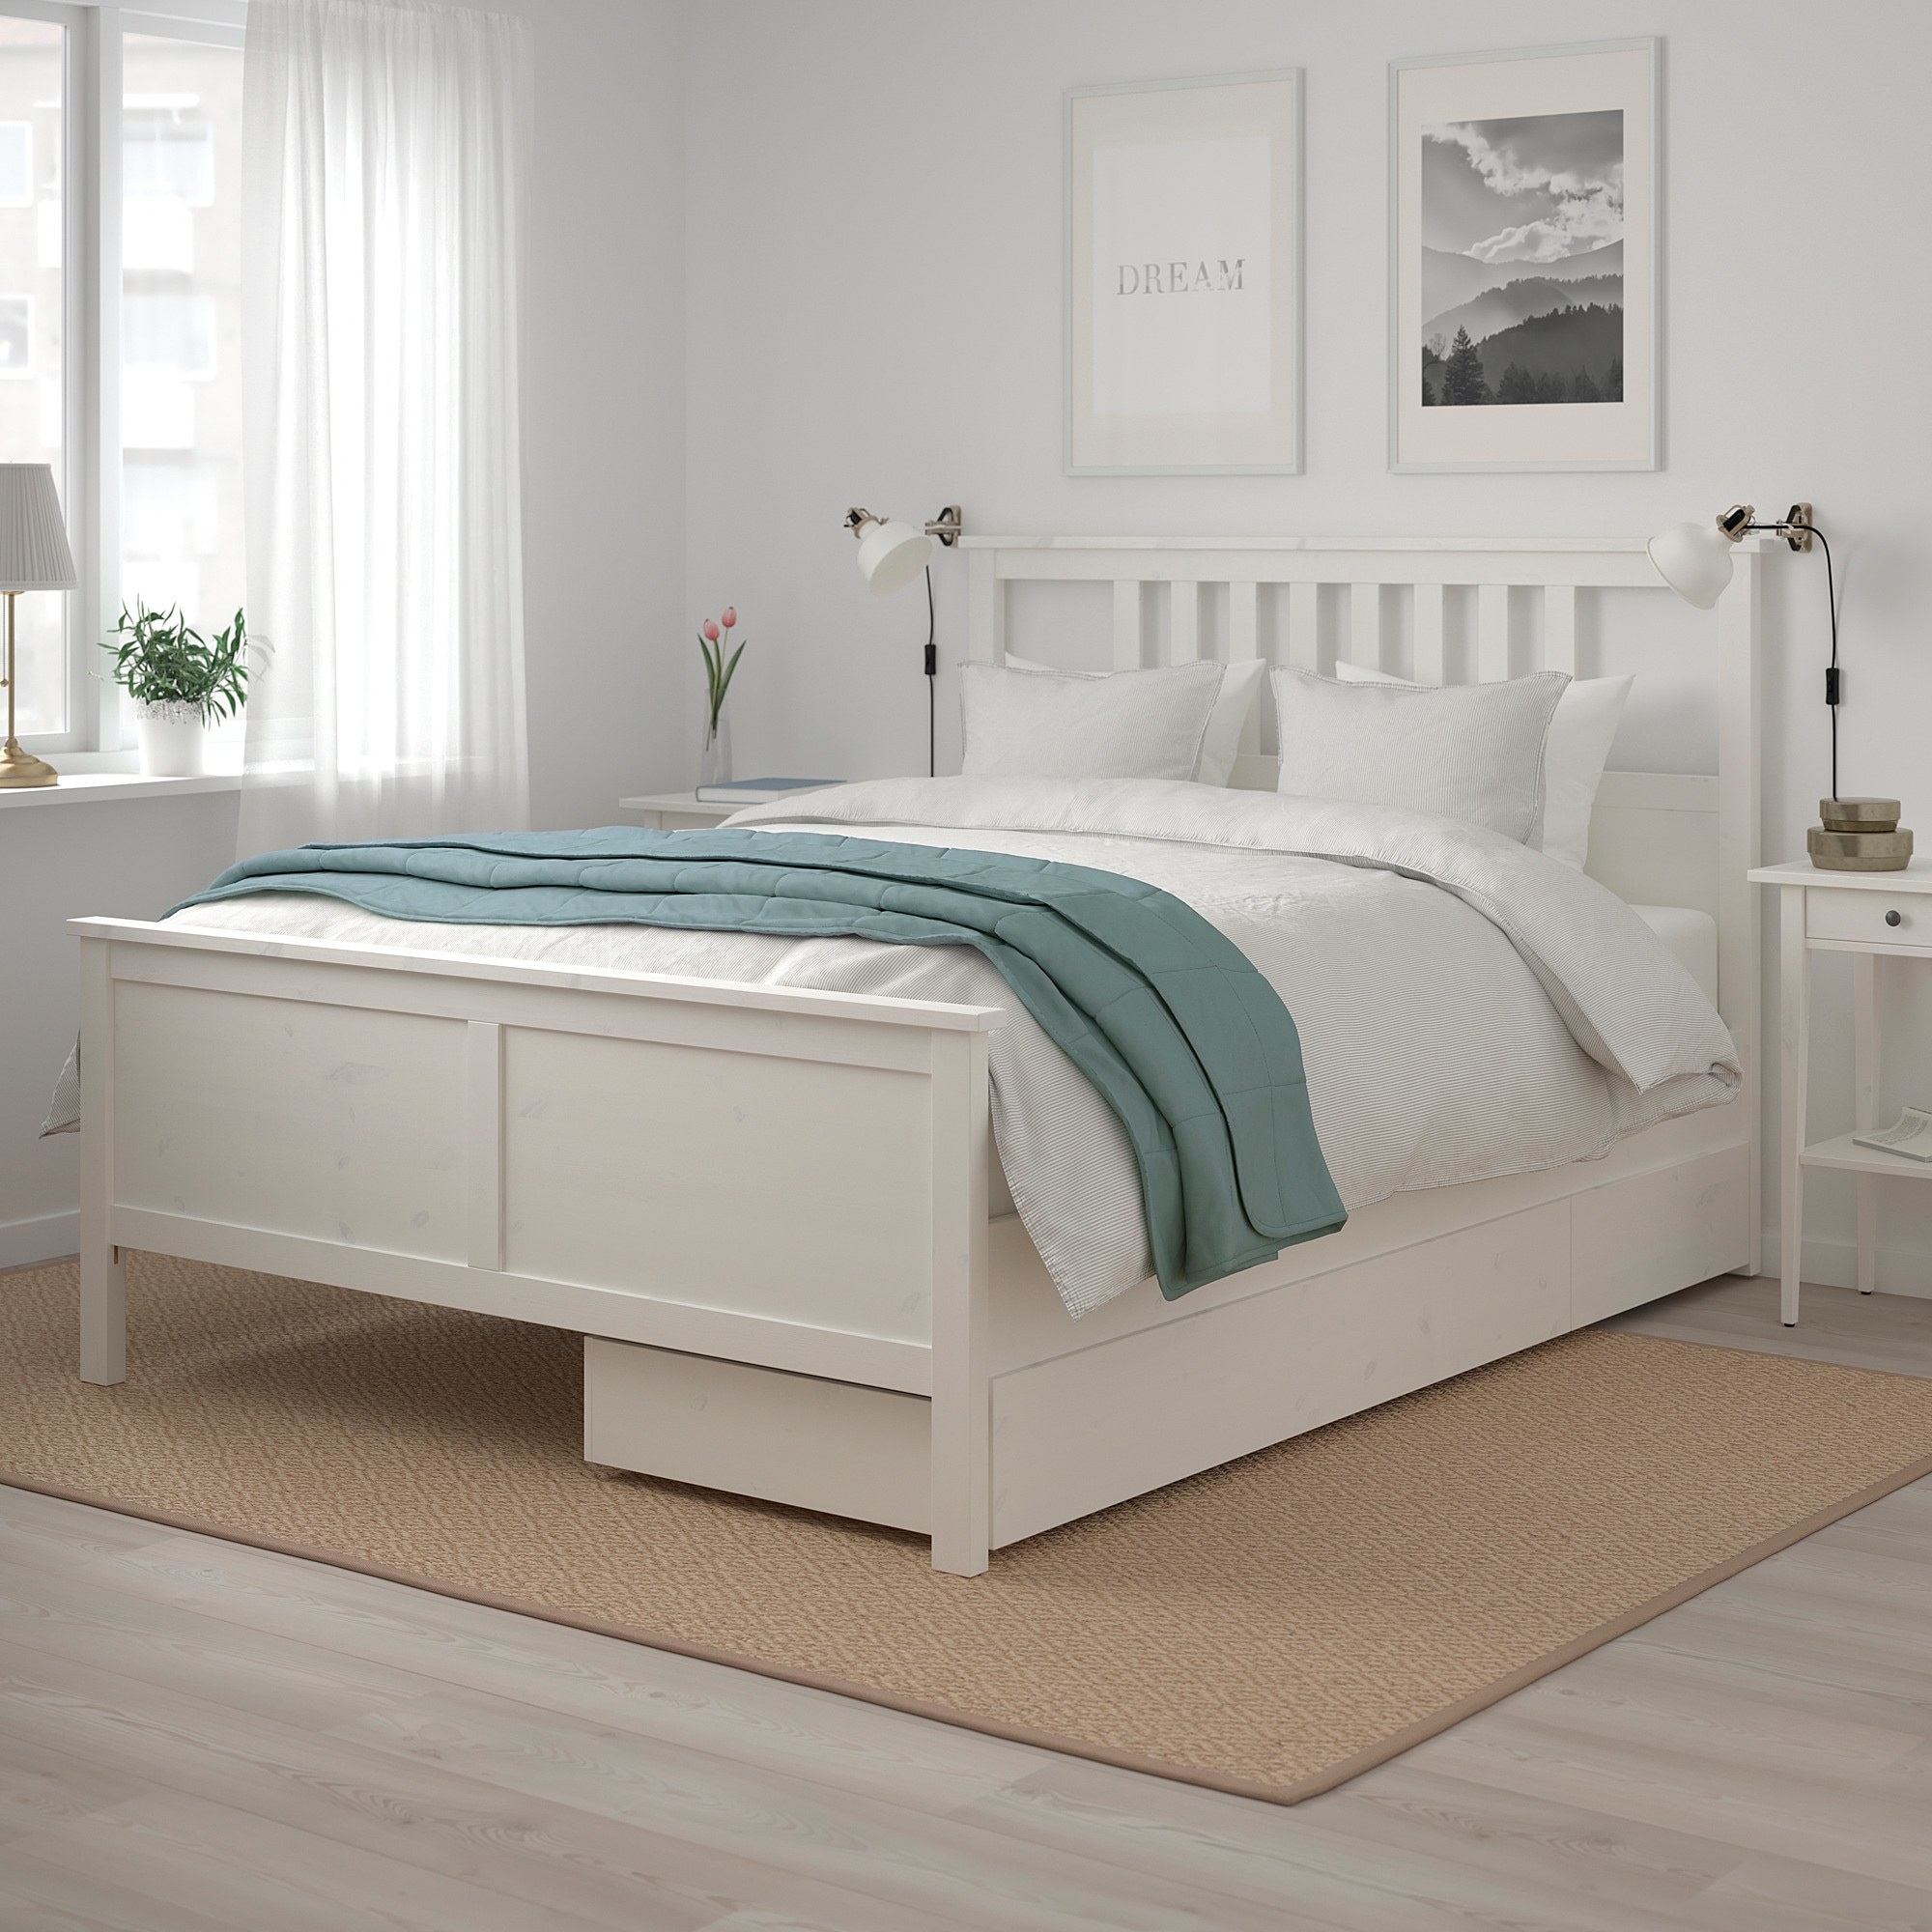 27 Bed Frames That Only Look, Does Ikea Carry California King Bed Frames